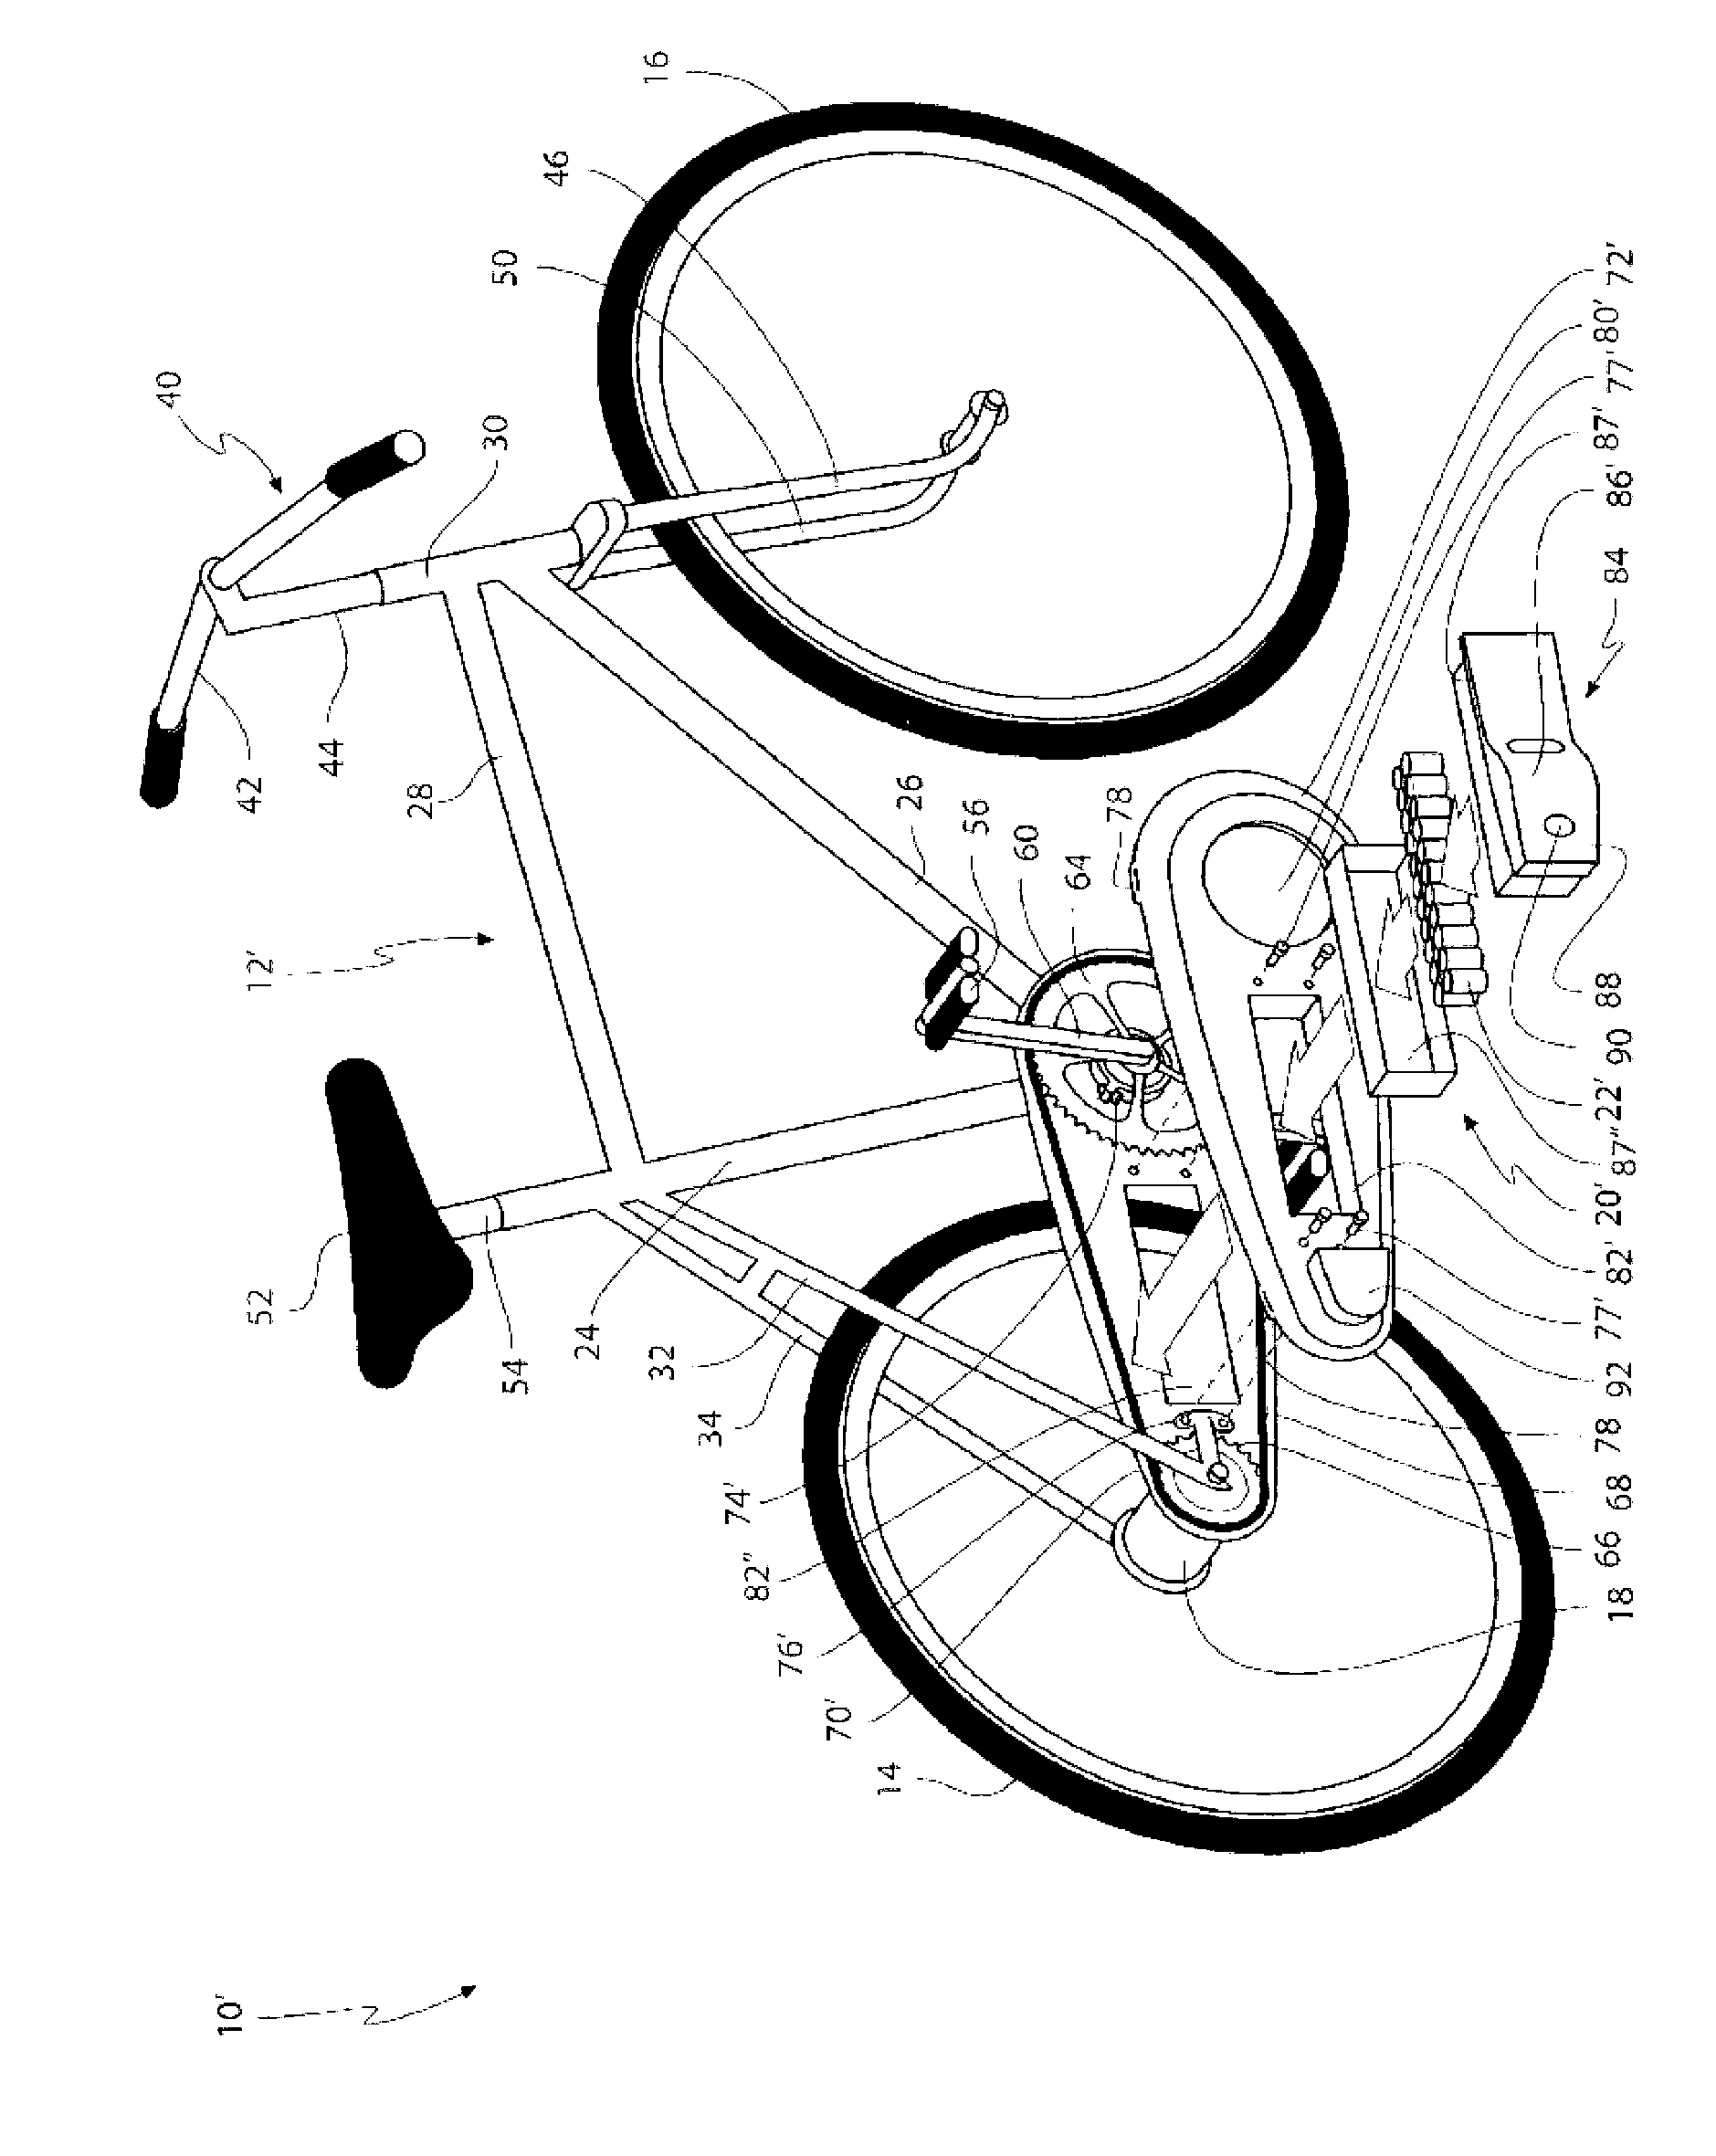 Power-source placement on electrically motorised bicycle